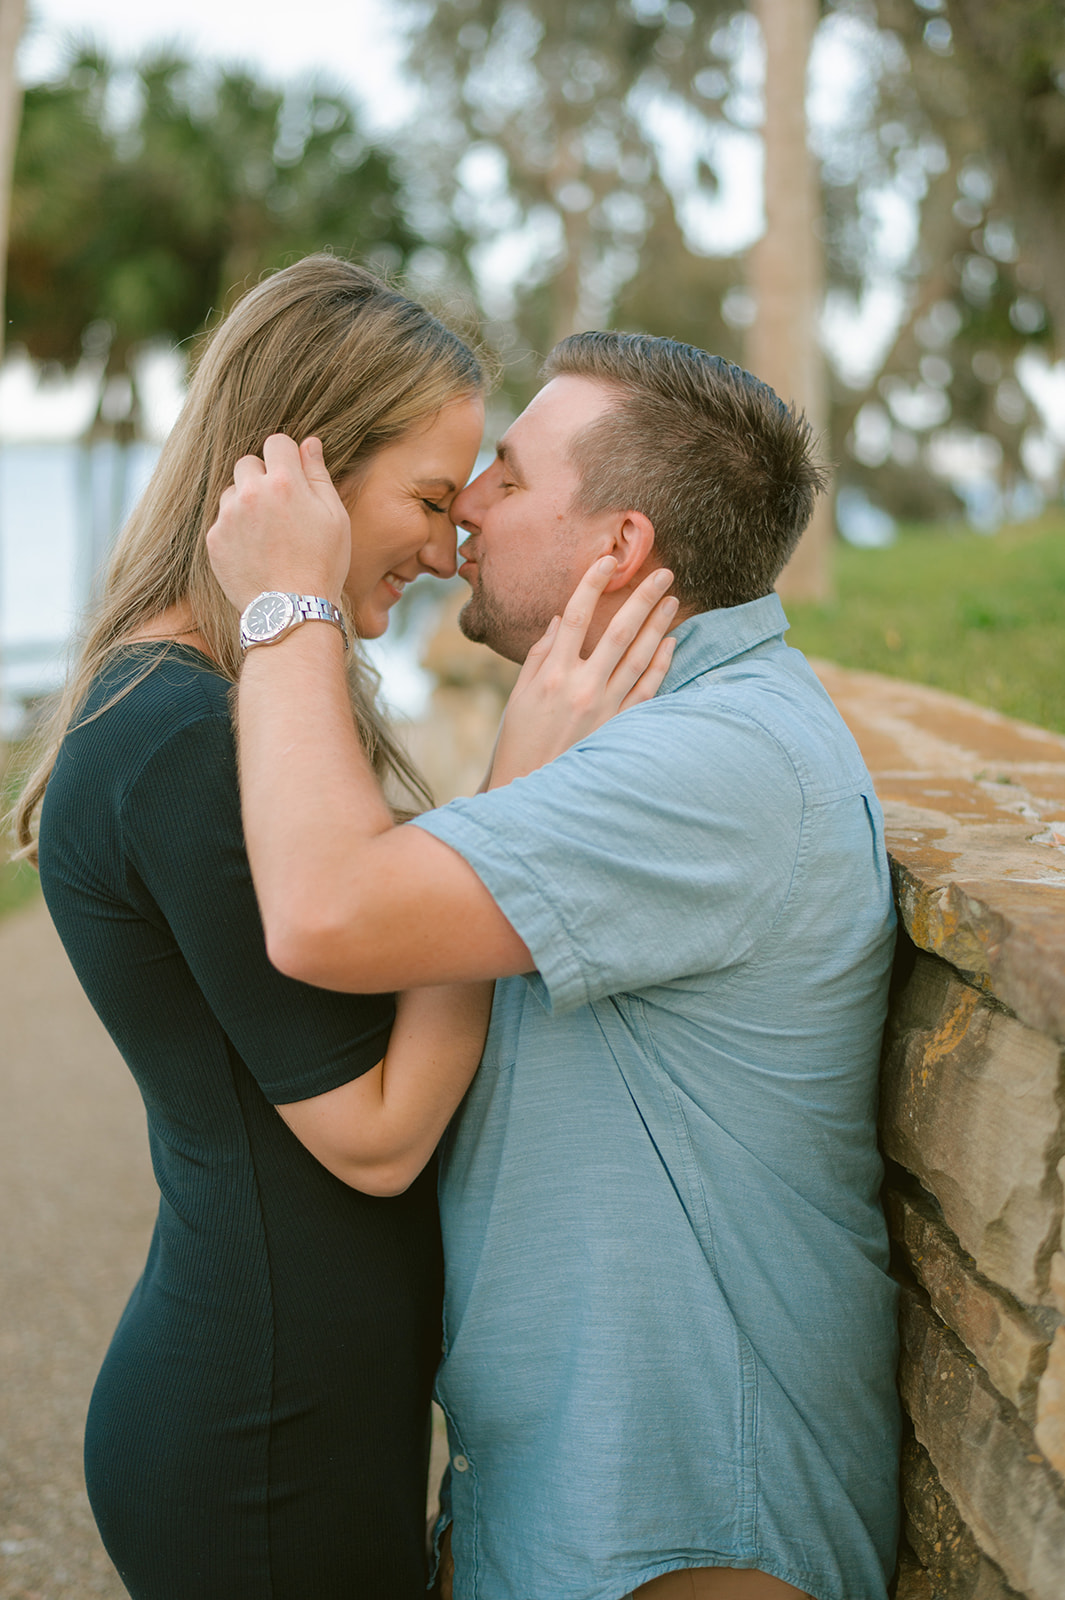 "Engagement photo with a rustic feel at Philippe Park, Tampa Florida"
